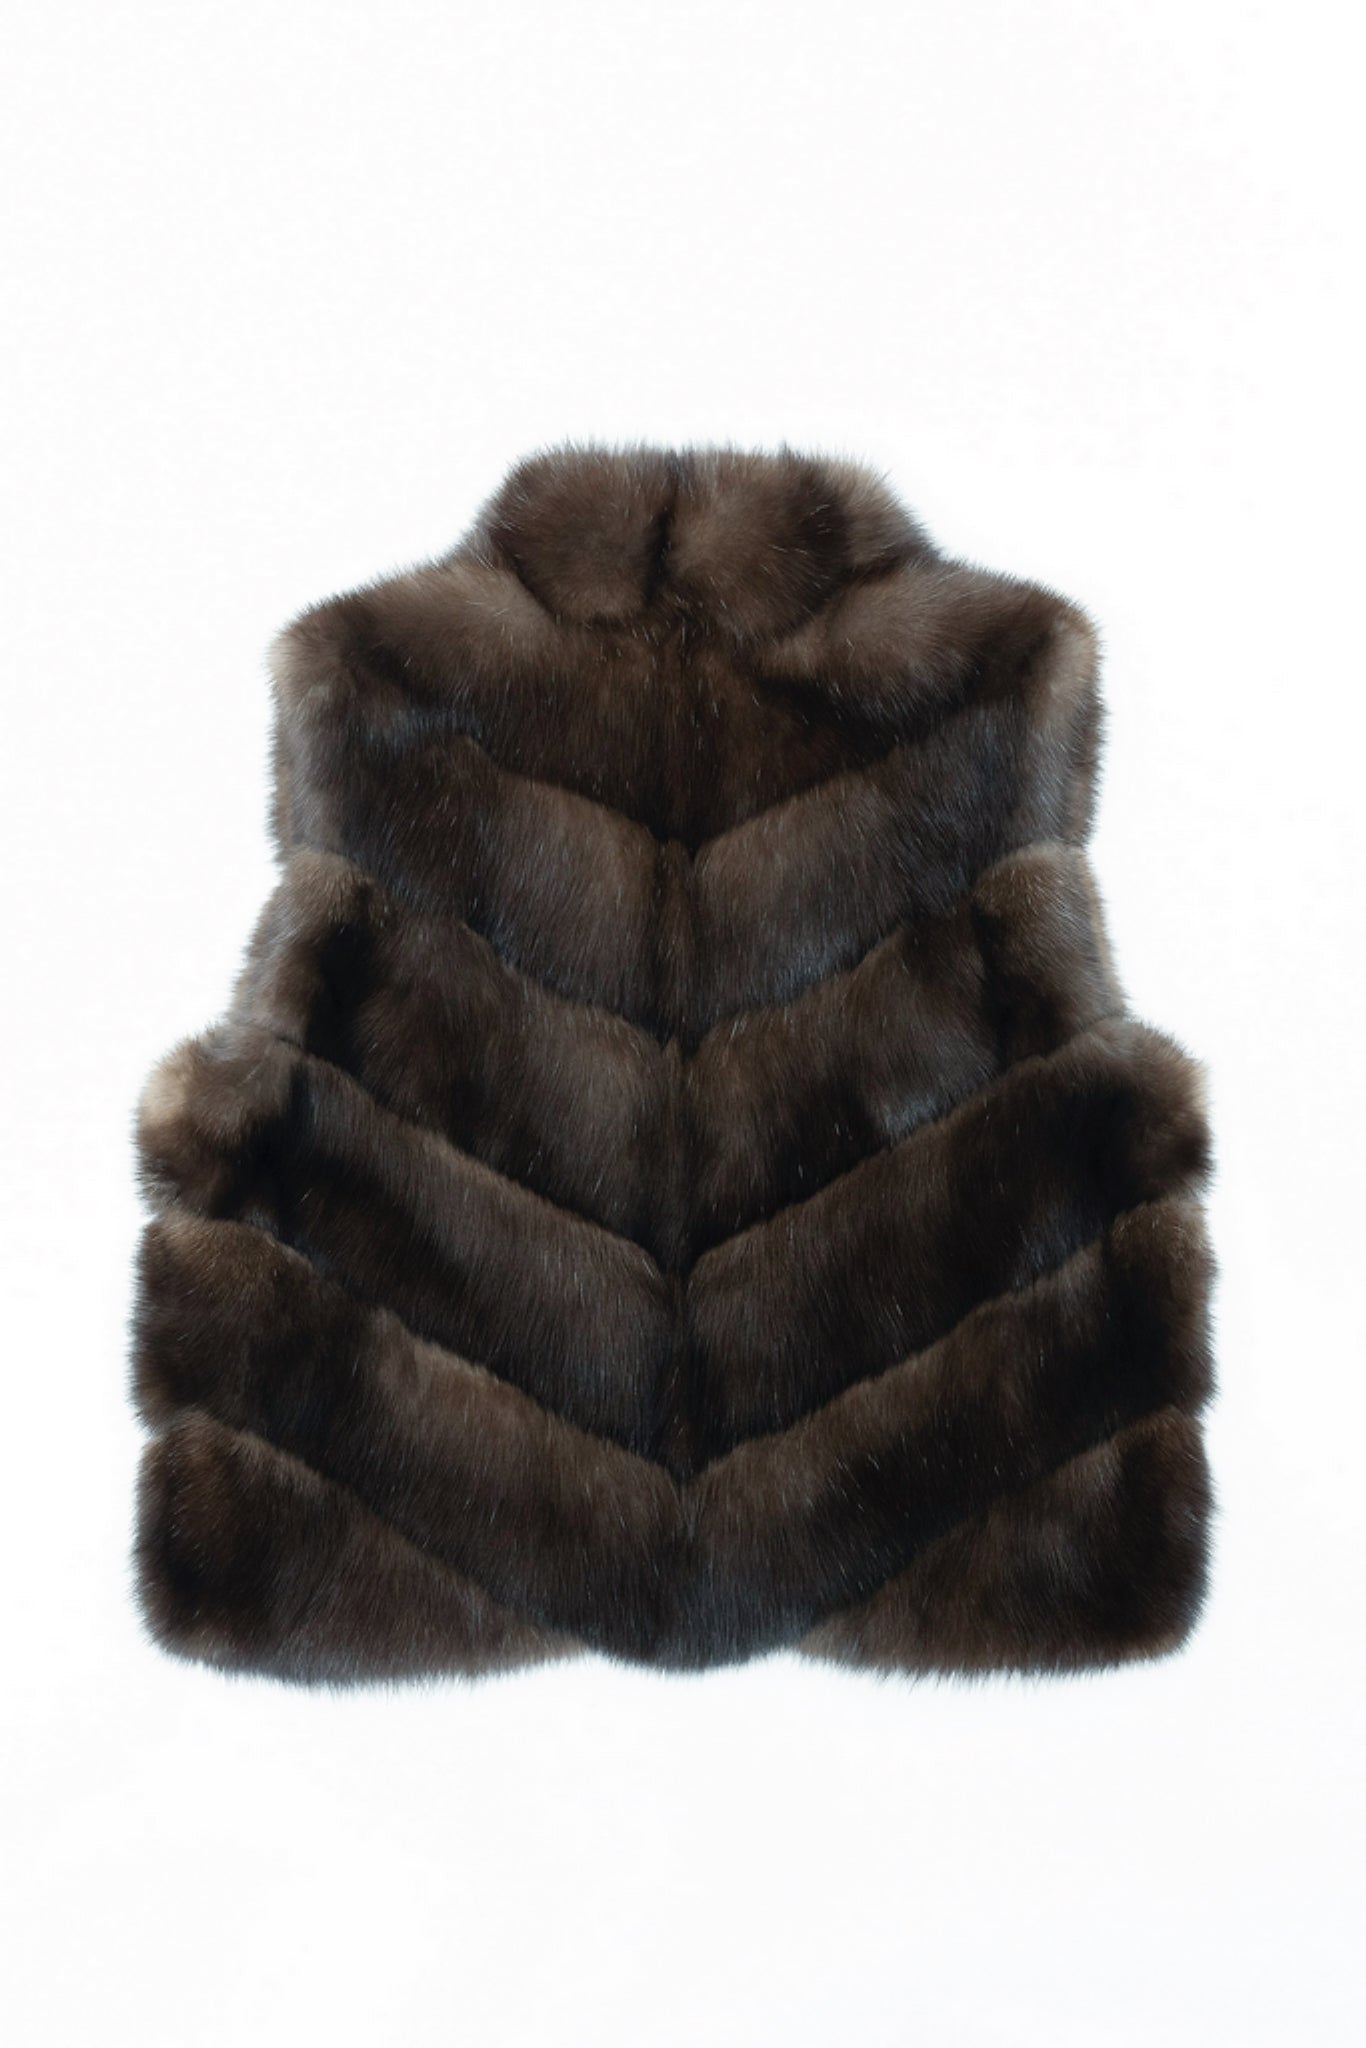 Sleek and Chic: Sable Fur Vest with Tailored Fit